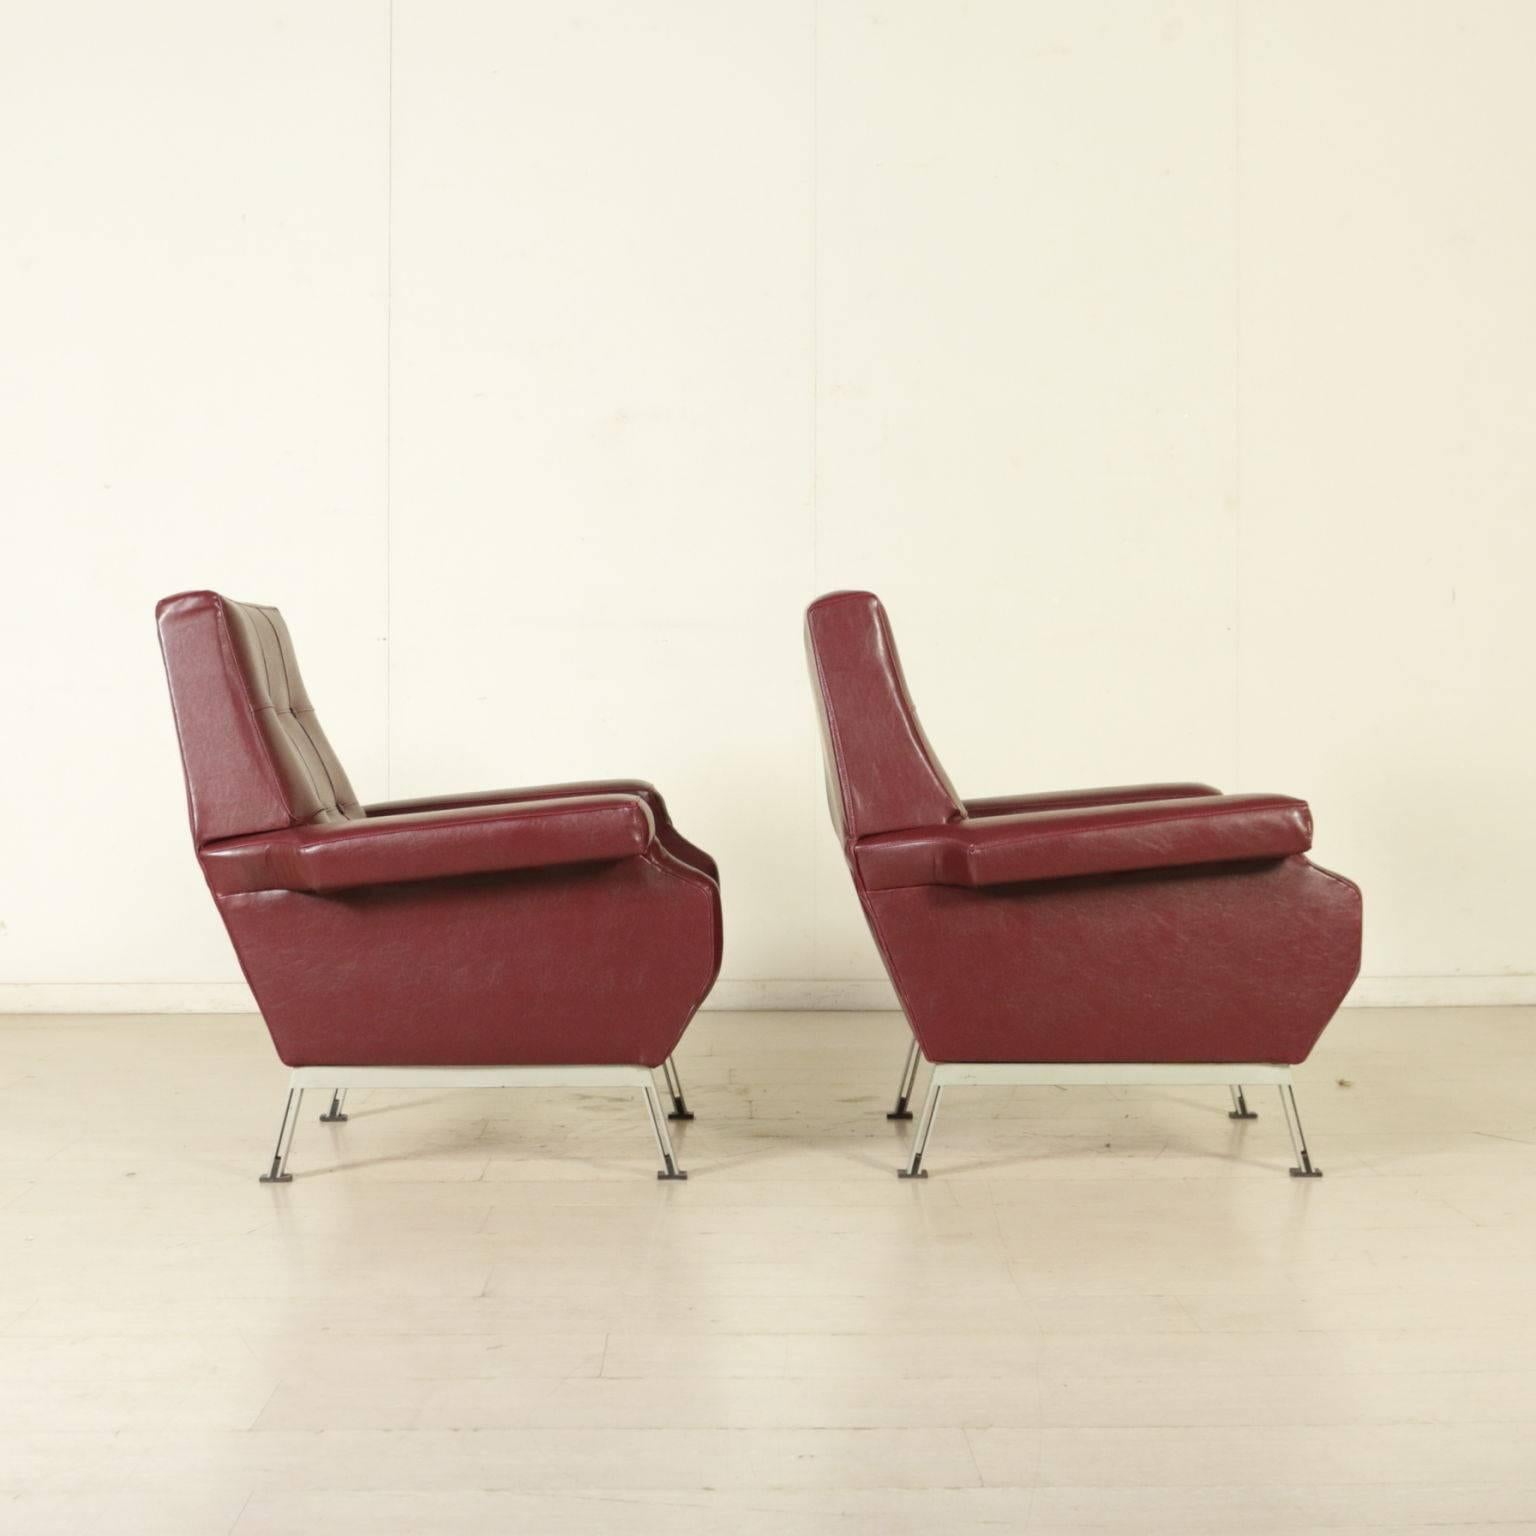 Mid-20th Century Pair of Armchairs Foam Leatherette Chromed Metal Vintage, Italy, 1960s